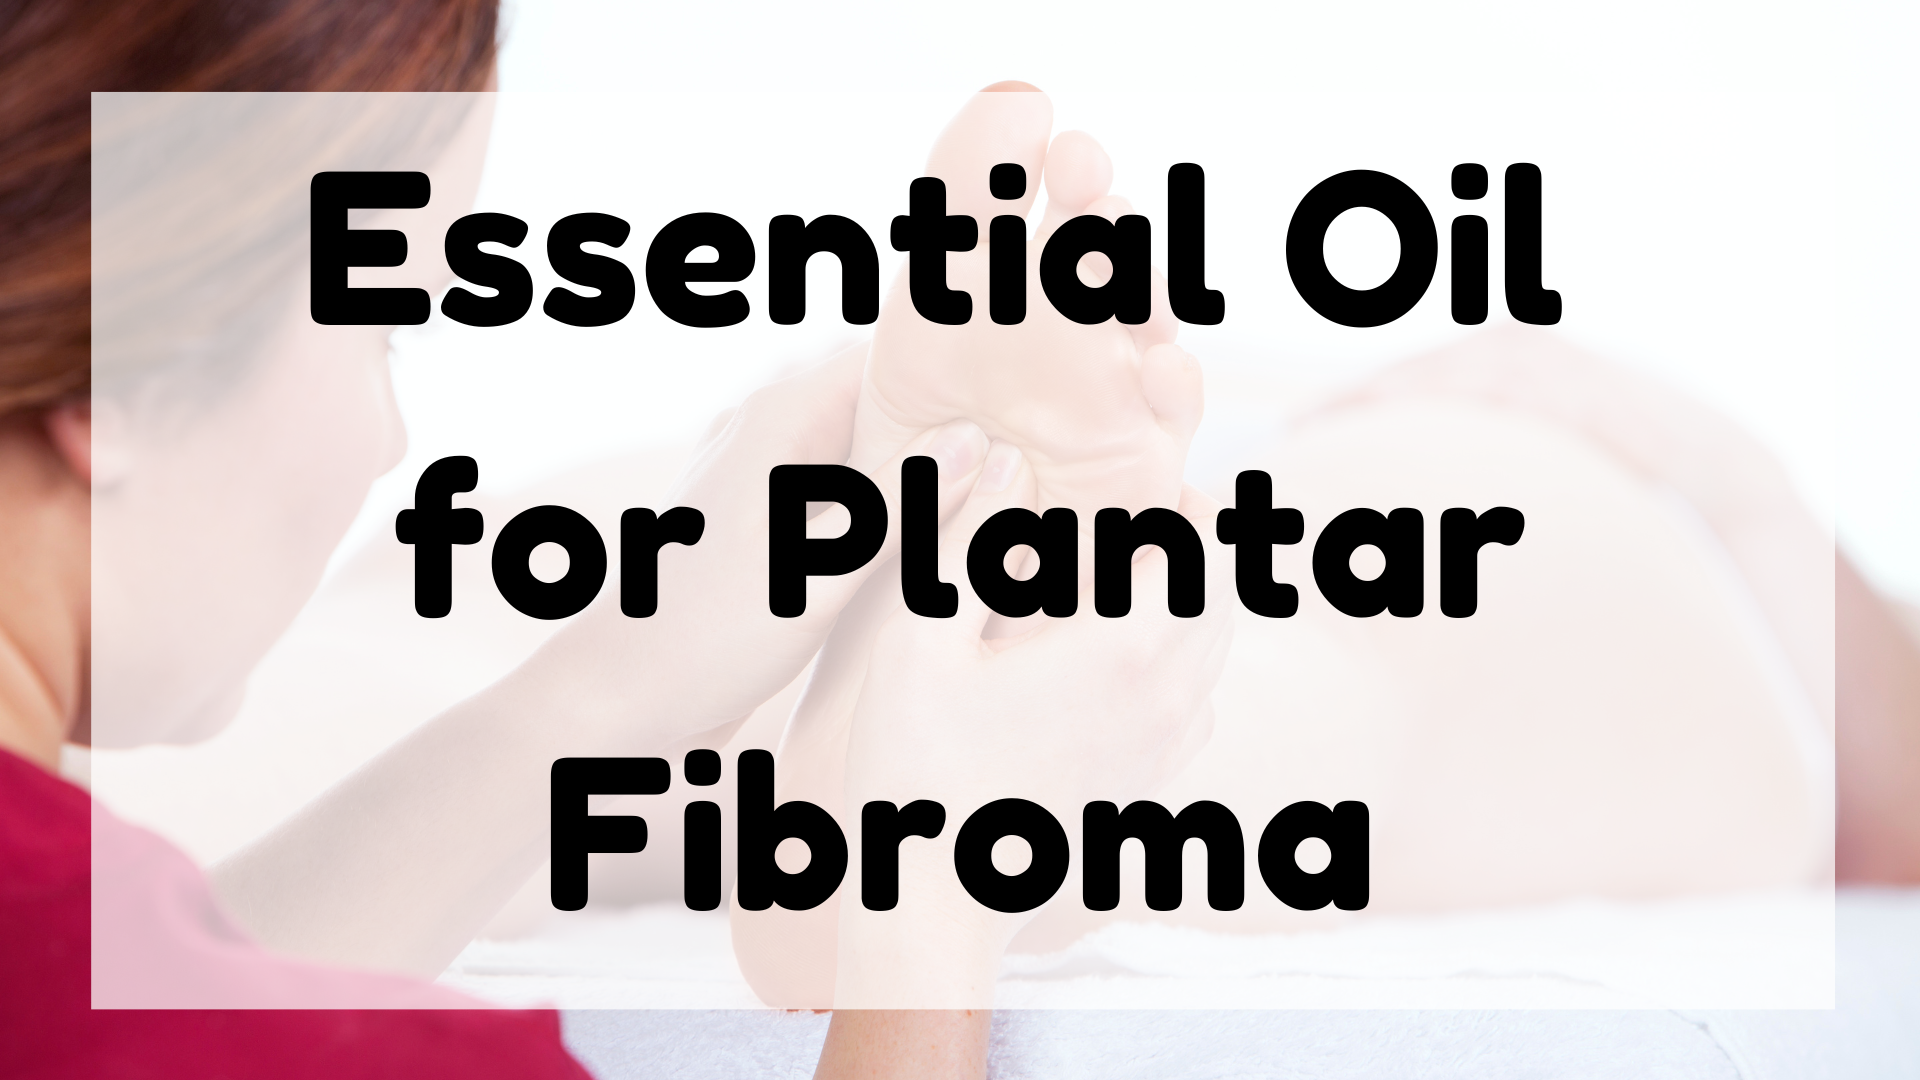 Essential Oil for Plantar Fibroma featured image